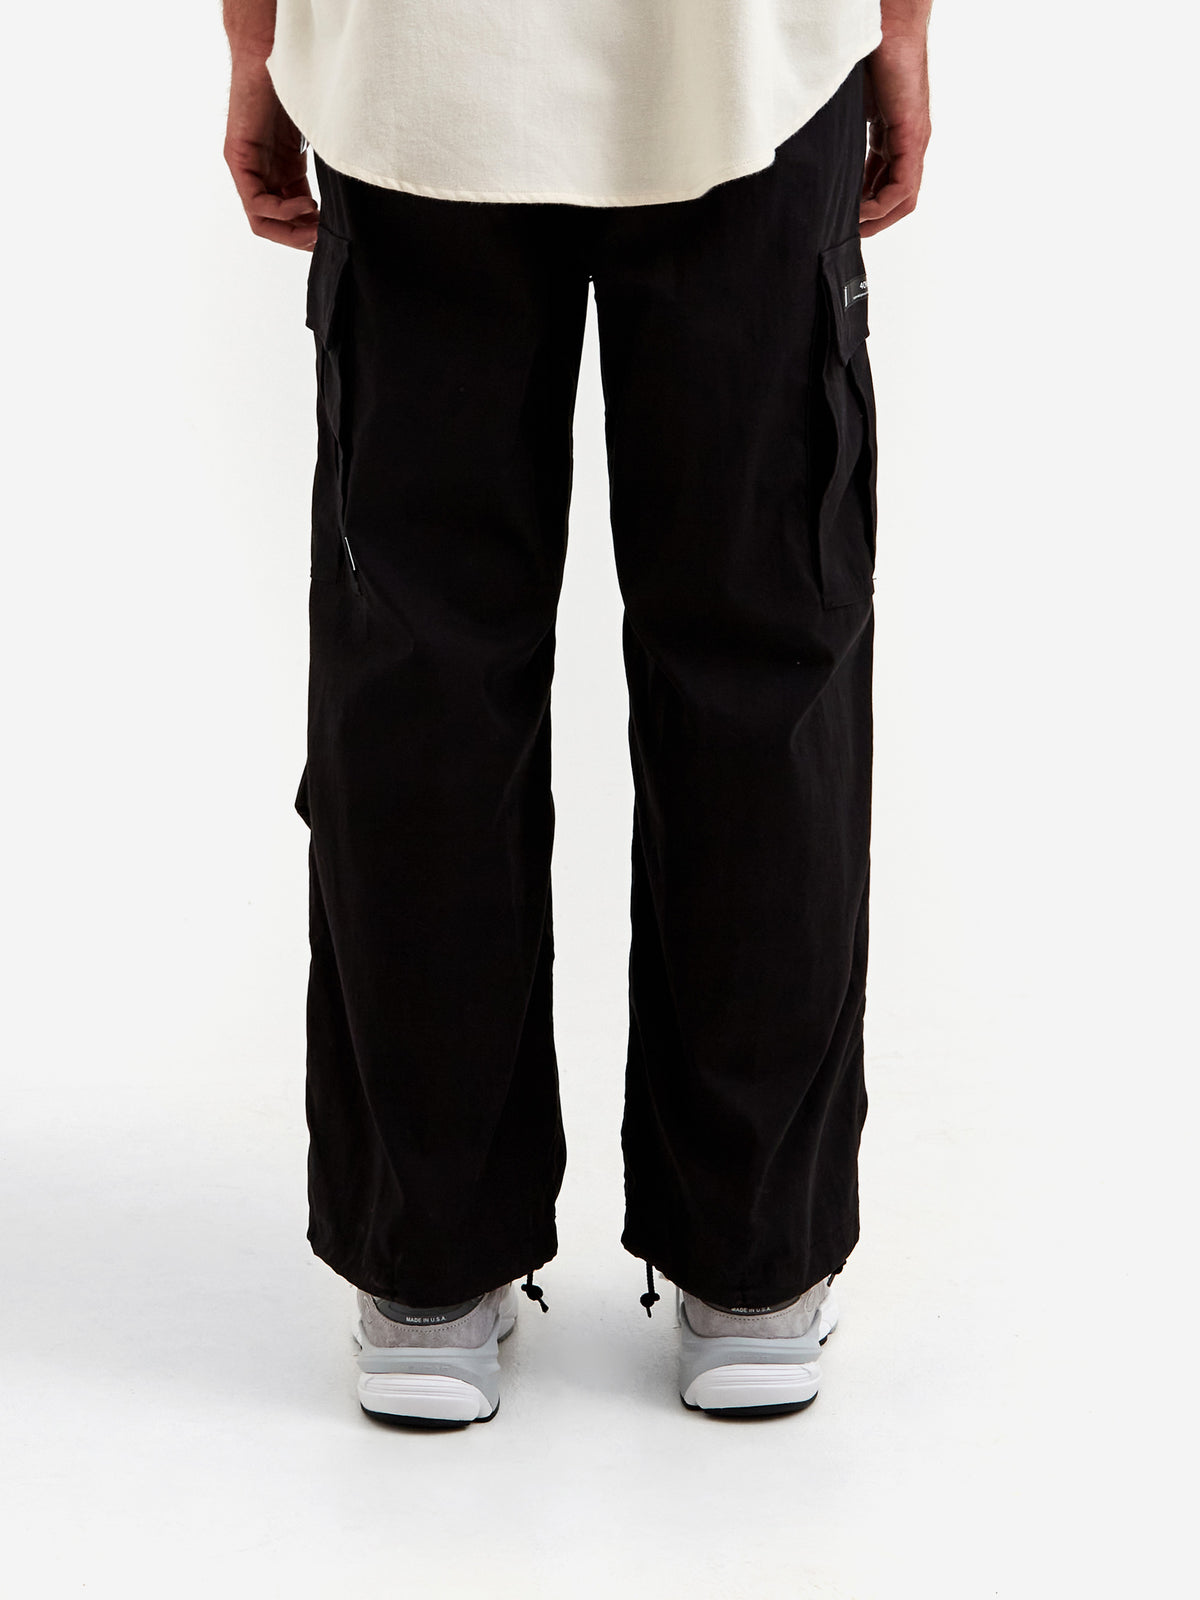 Shop Smarter, Live Better: WTAPS MILT0001 / Trousers 14 / NYCO ...